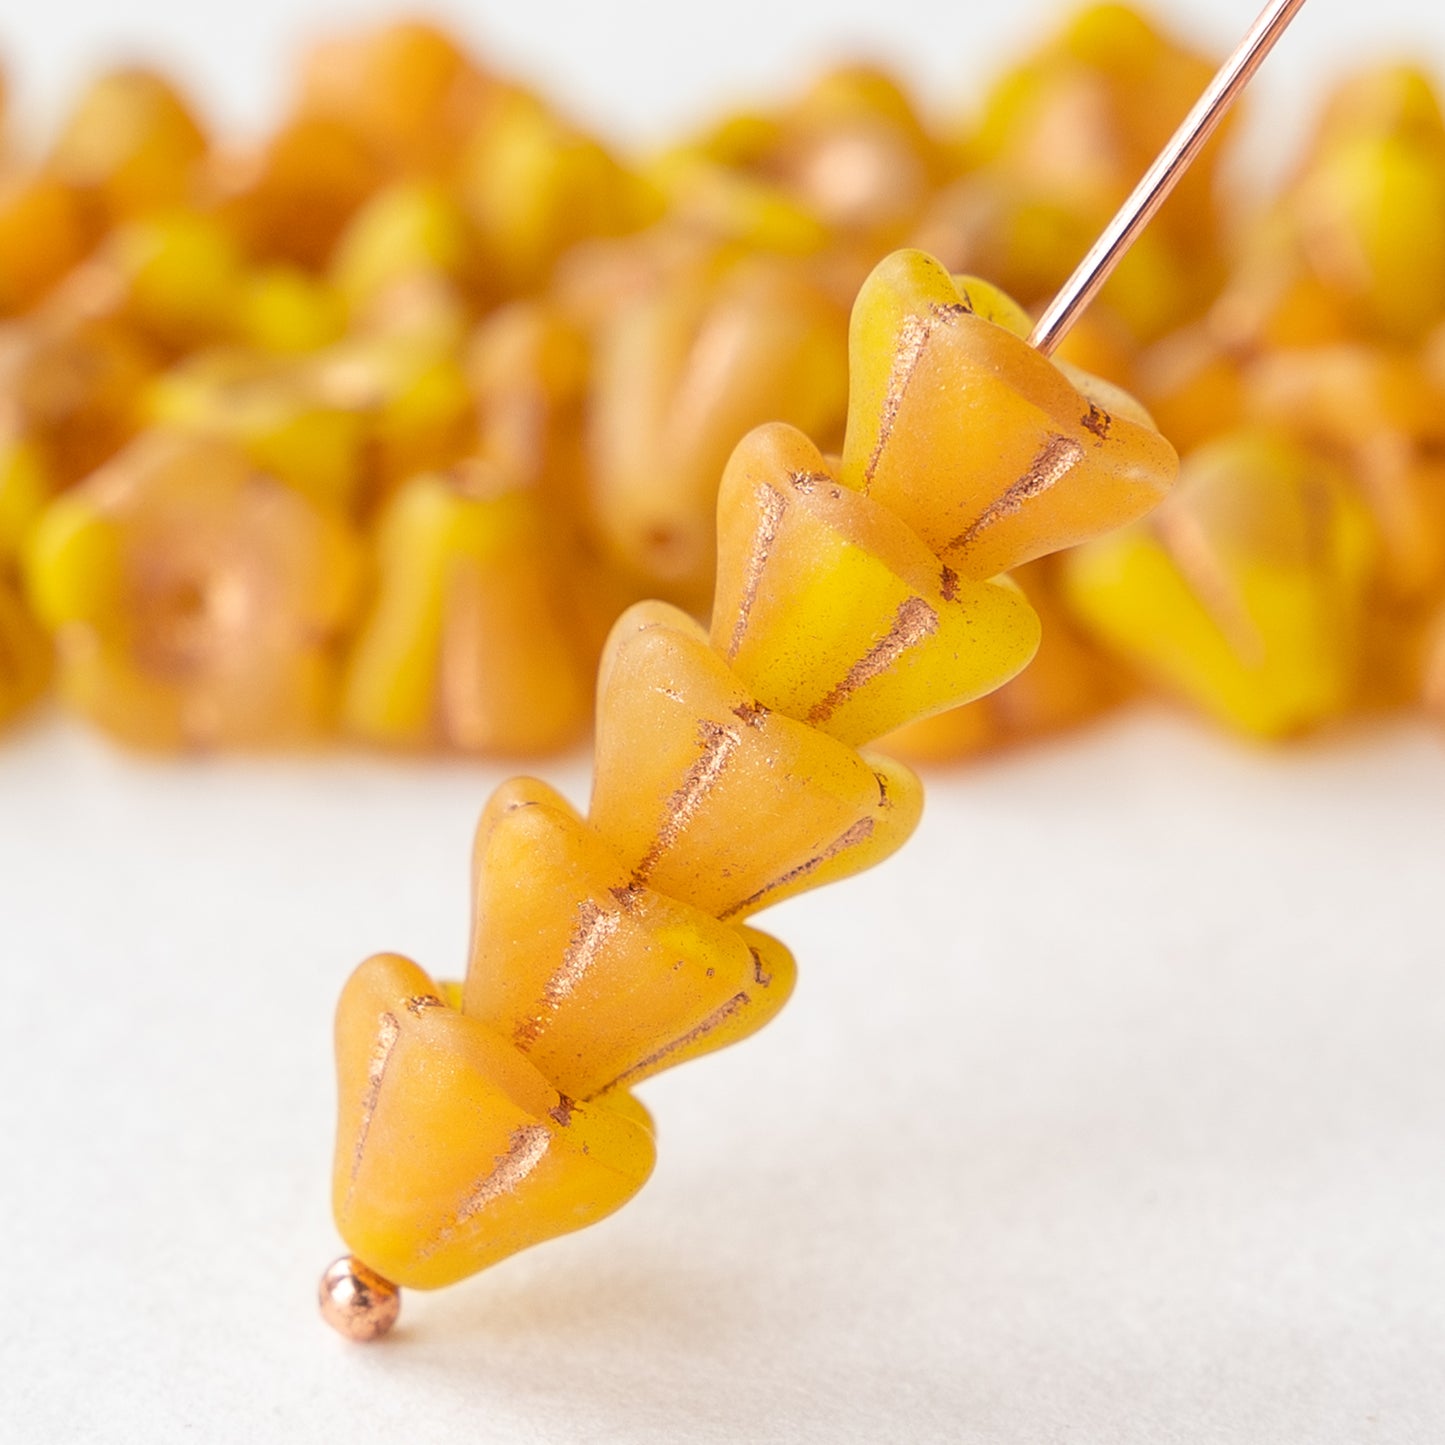 6x8mm Trumpet Flower Beads - Yellow Orange Mix with Pink Wash - 30 beads